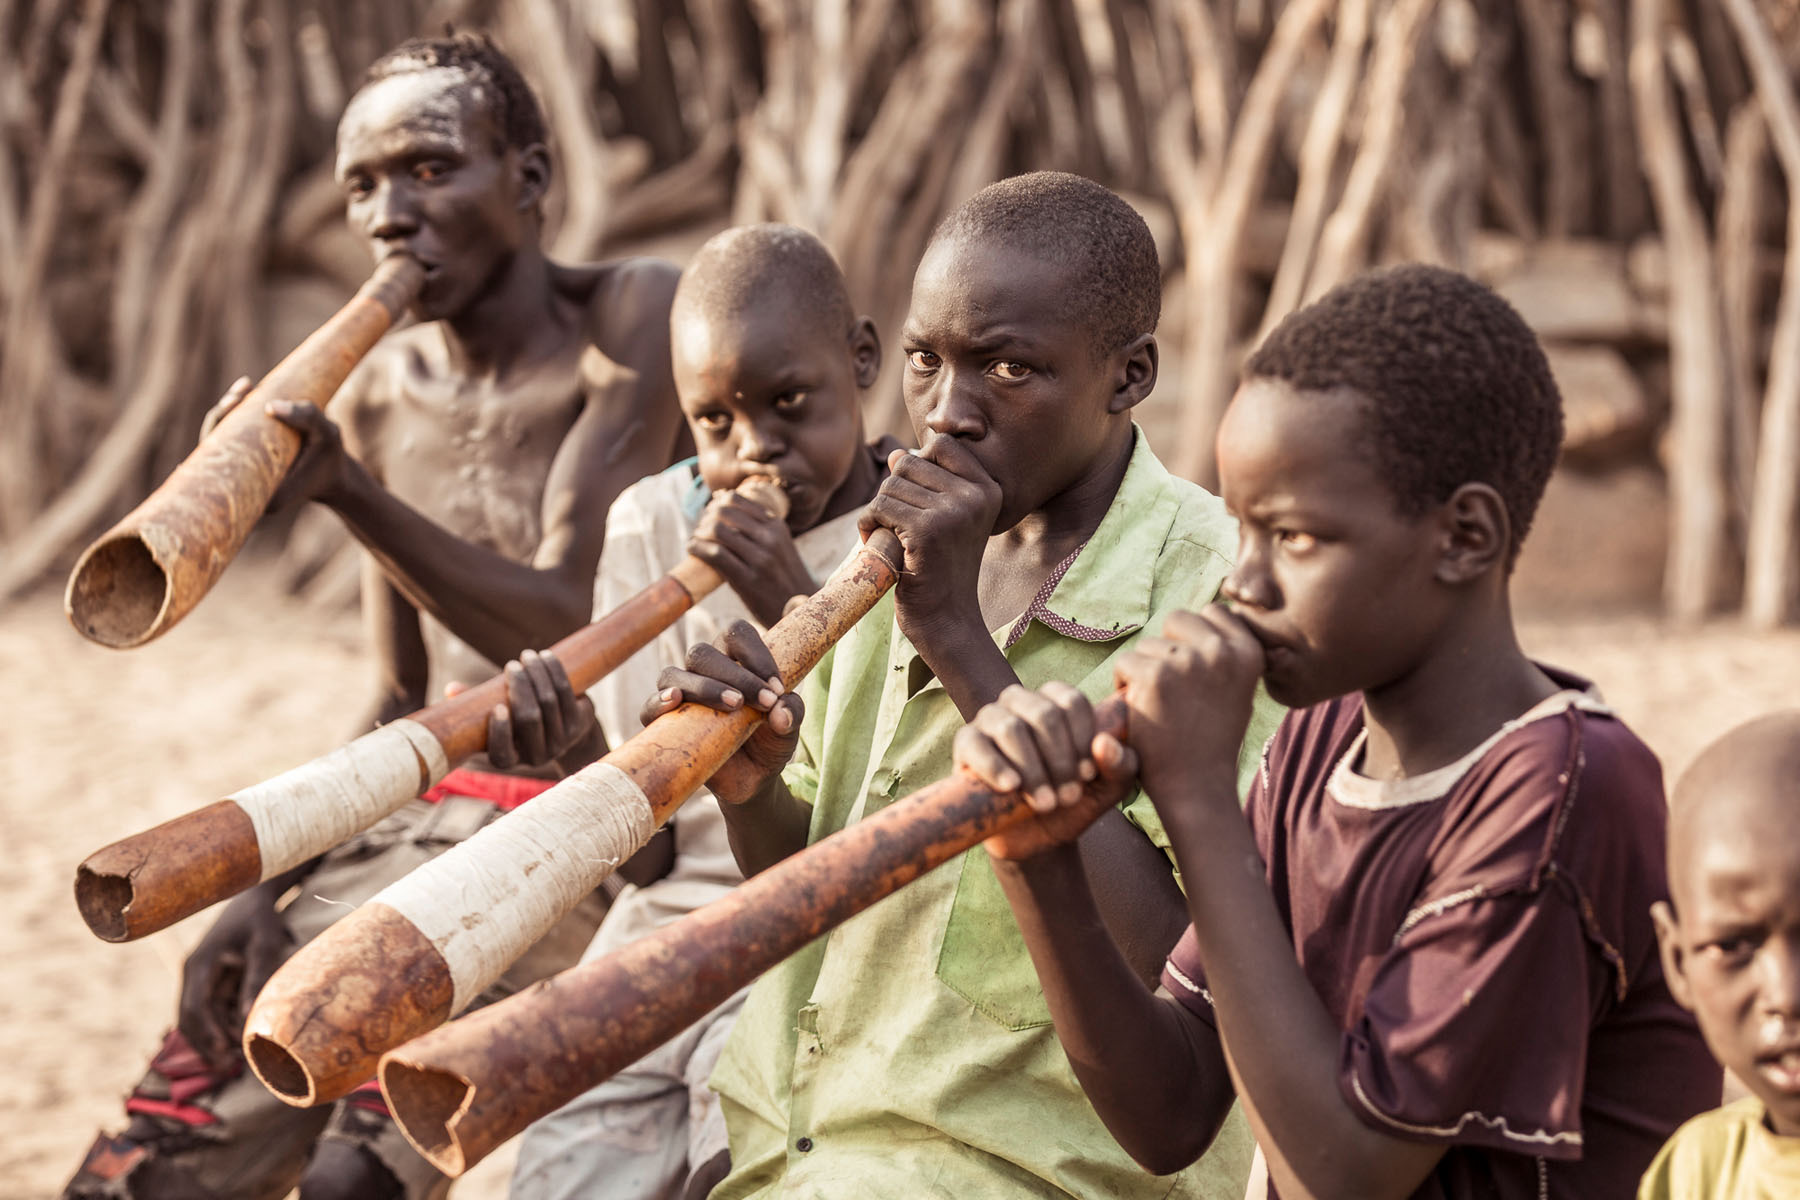 The Toposa culture is orally transmitted through songs, dance, music, poems and folklore © Joe Buergi